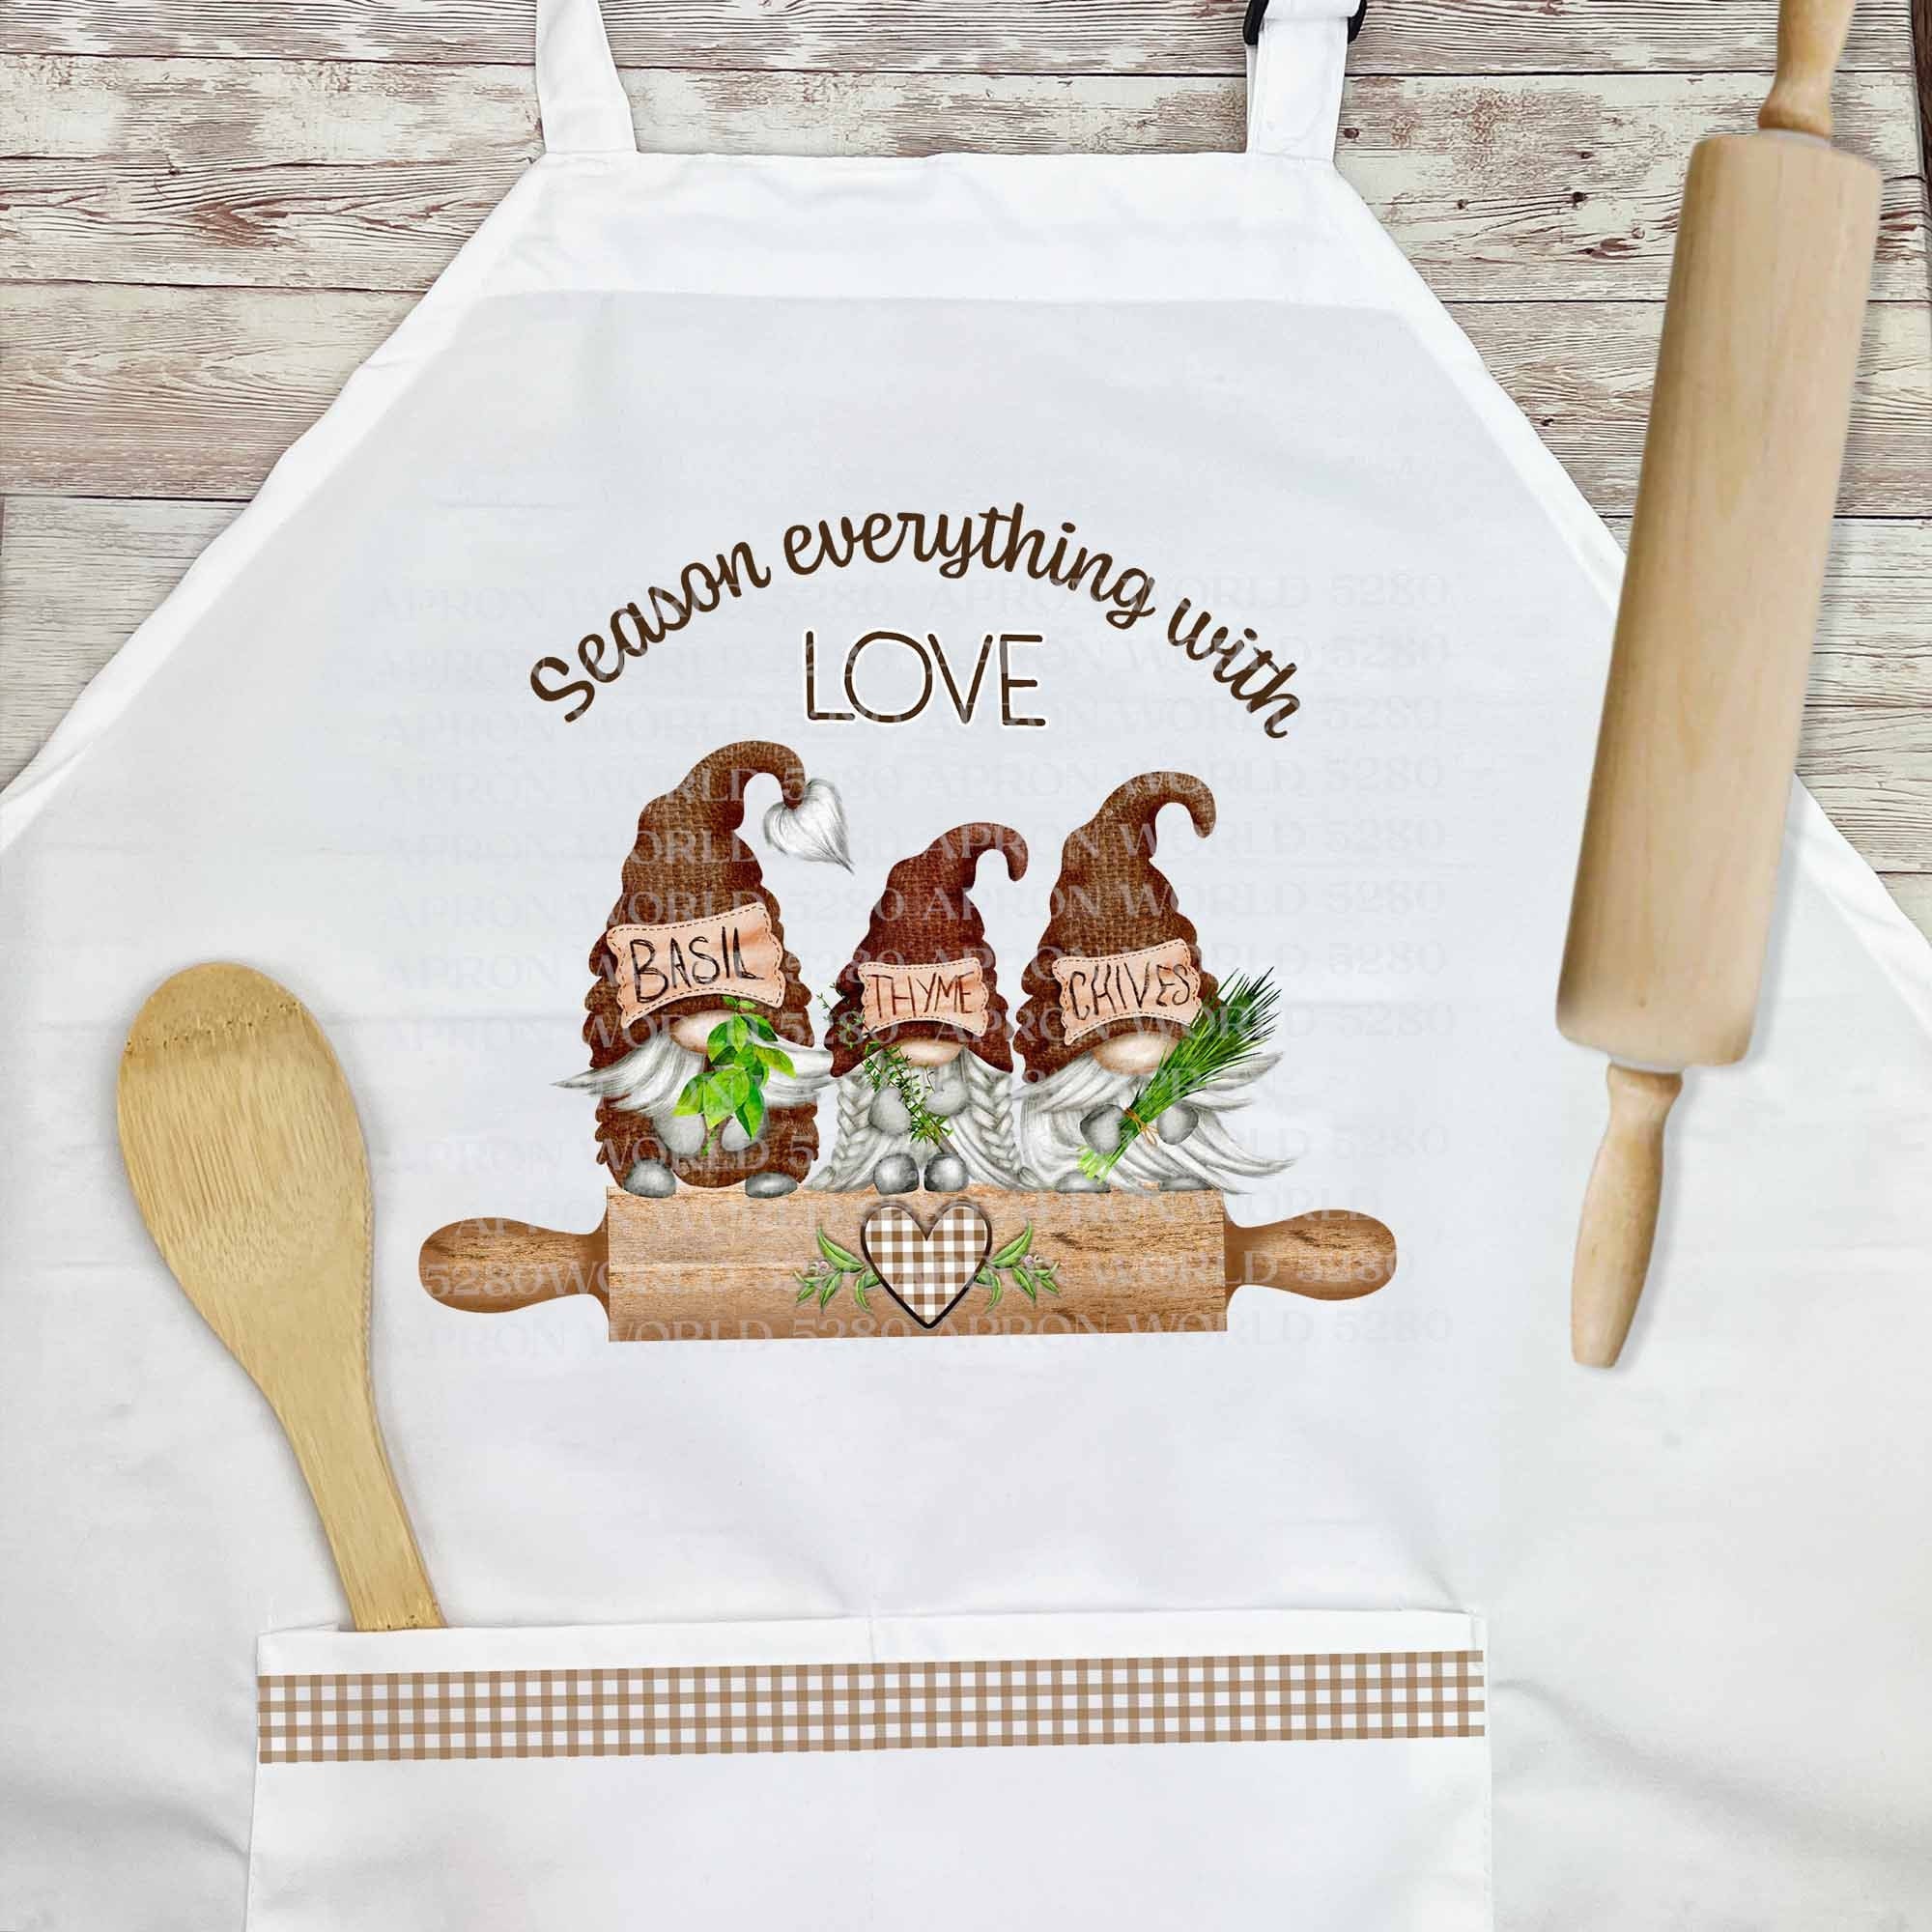  DYJYBMY Mom's Kitchen Chef Hat and Apron Set, Funny Chef Hat  for Woman, Funny Cooking Grilling Apron Gift for Woman Mom Sisters, Gifts  for Mom and Mother in Law from Daughter